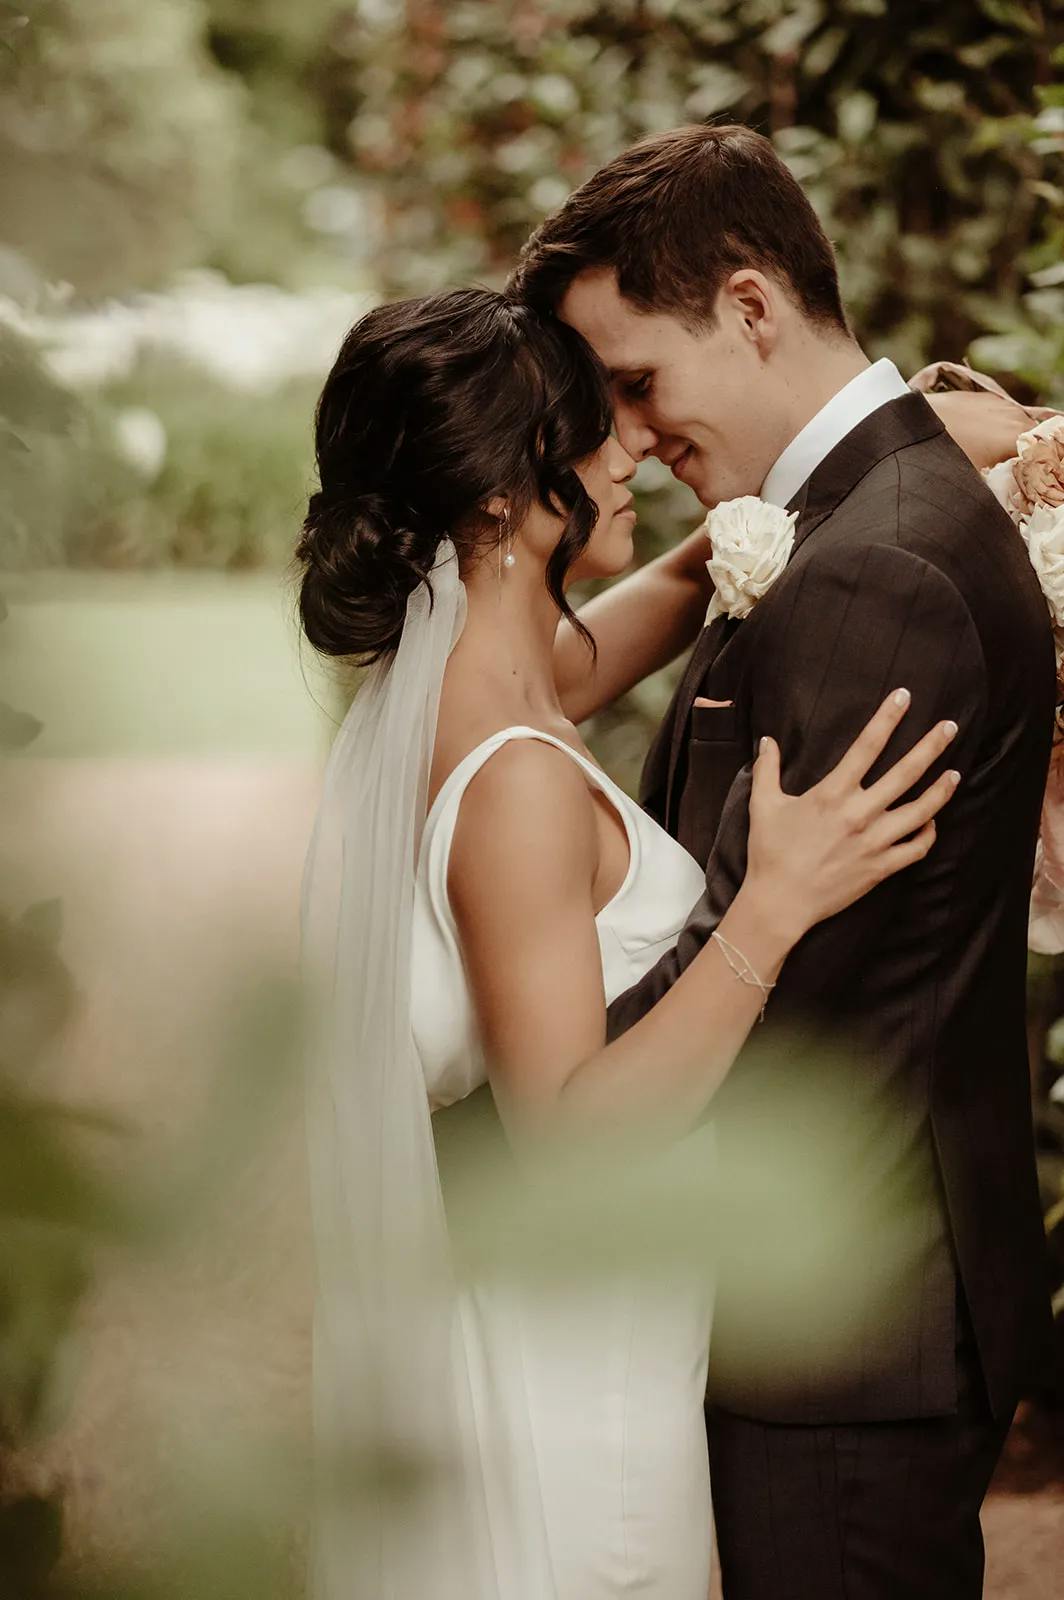 A couple in wedding attire embraces tenderly in a garden setting. The bride, in a white dress and veil, and the groom, in a dark suit and tie, touch foreheads and smile softly. They are surrounded by greenery, creating an intimate and romantic atmosphere.